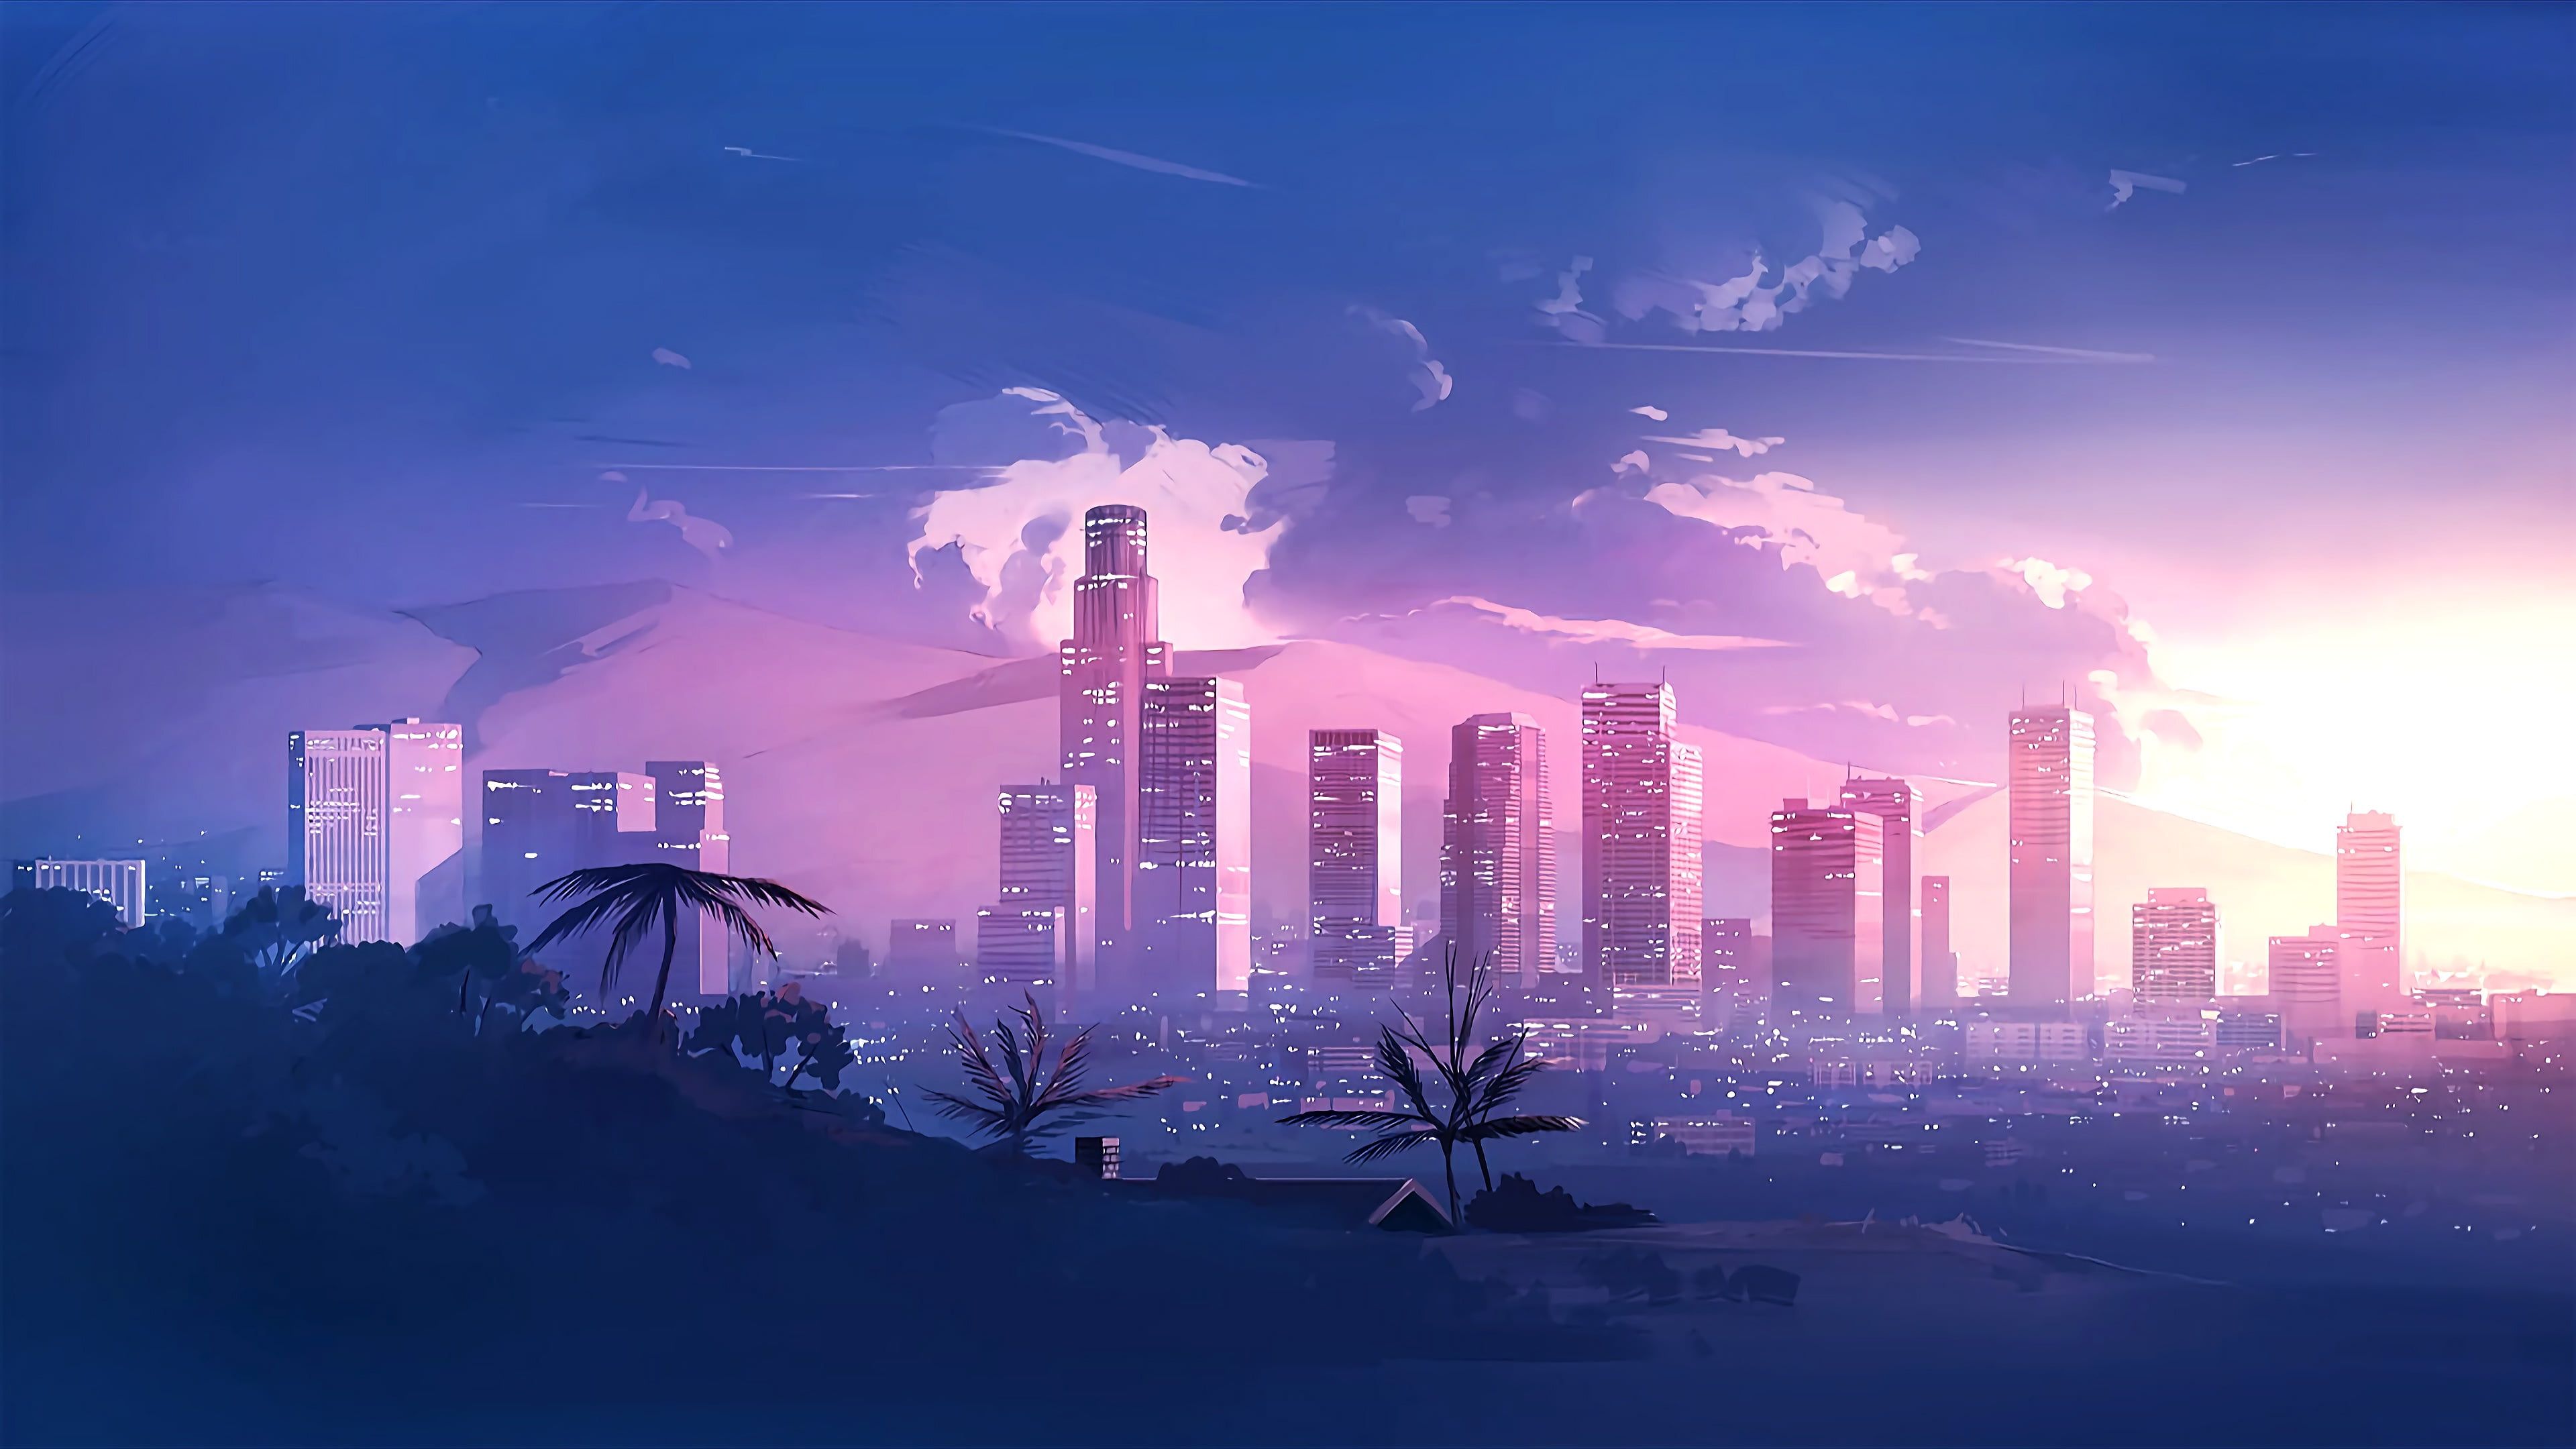 Music The city #Style #Landscape s #Style #Neon #Illustration 's #Synth #Retrowave #Synthwave New Retro Wa. City wallpaper, Anime scenery, Anime background